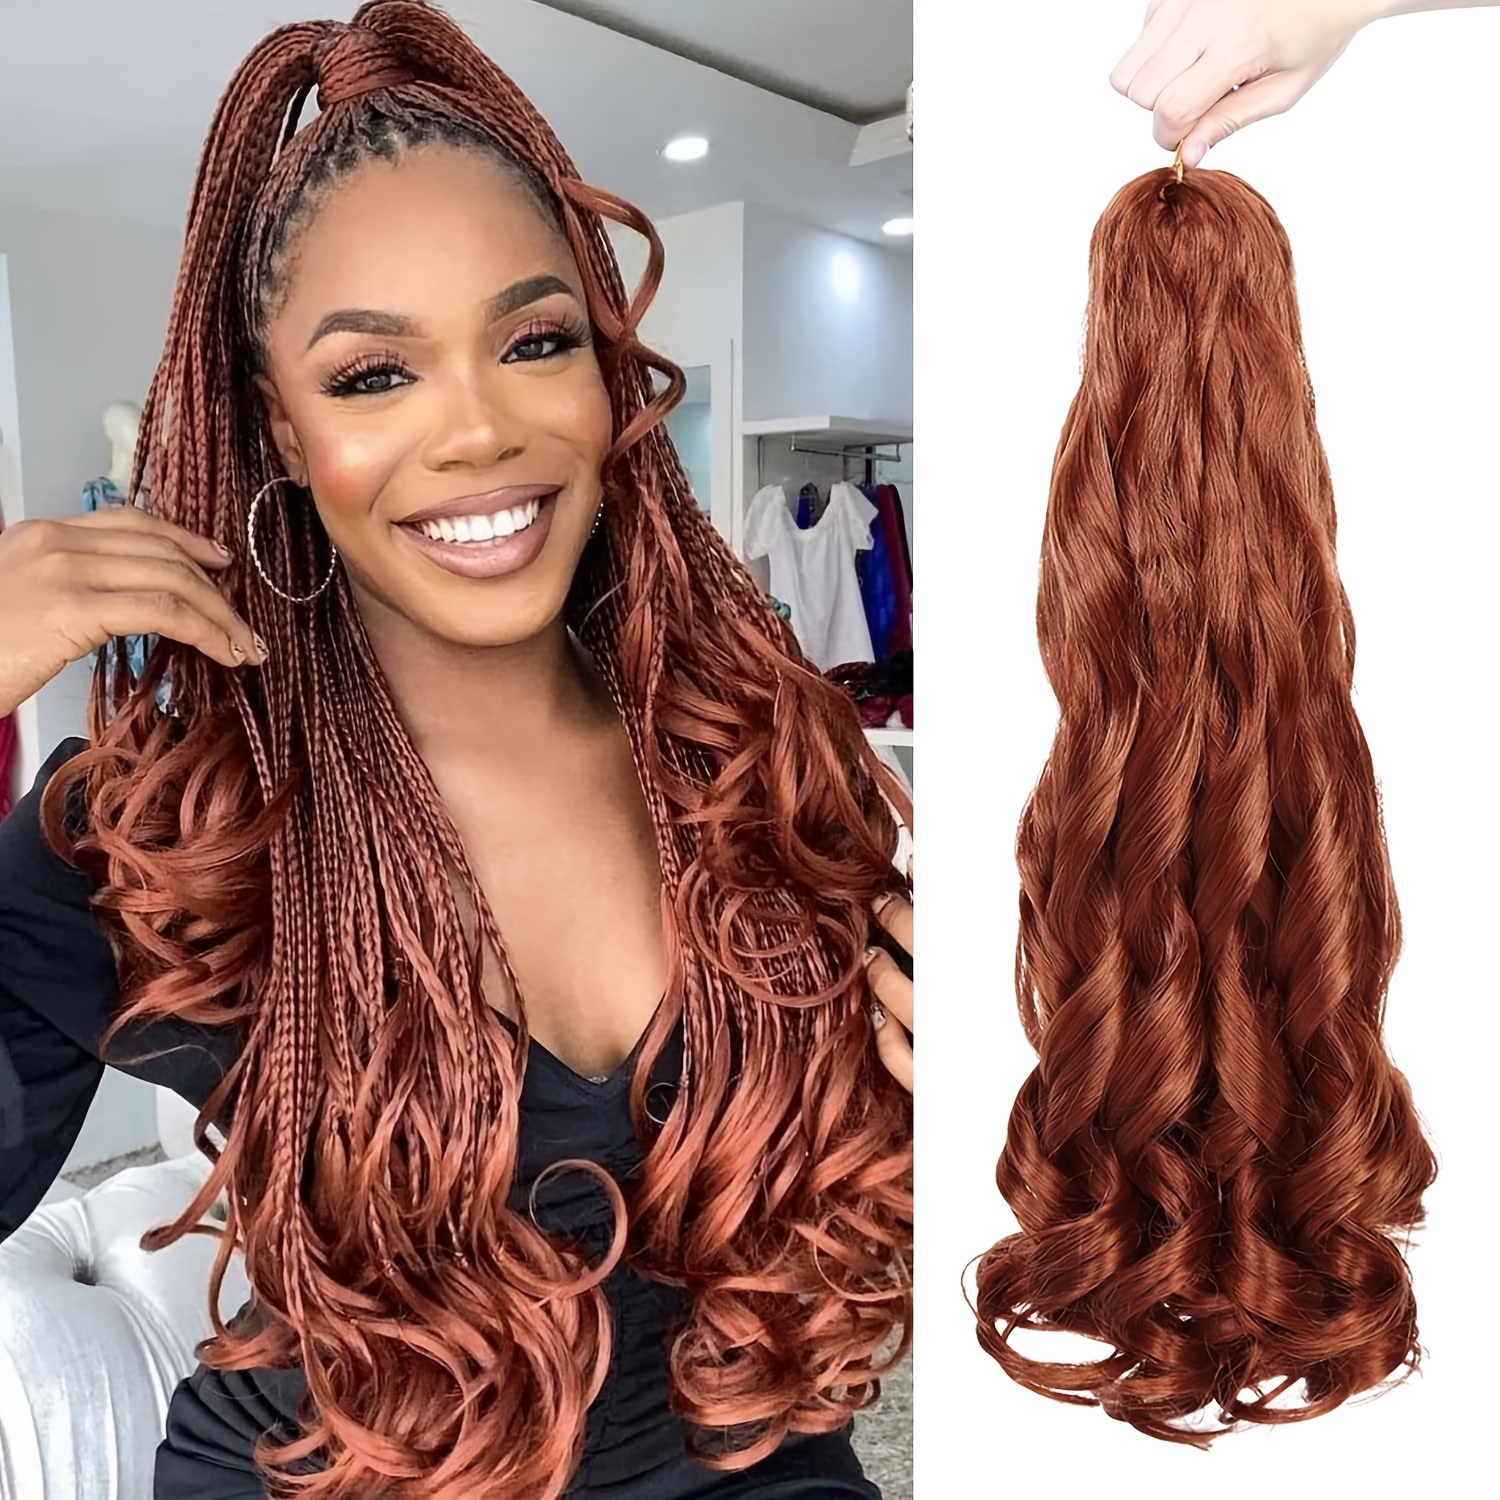  Braid Hair Extensions, 5 PCS Baby Braids Front Side Bangs Long  Braided Hair Piece Natural Soft Hair for Women Daily Wear 22 Inch Clip in  Hair Extensions (Brown Black) 